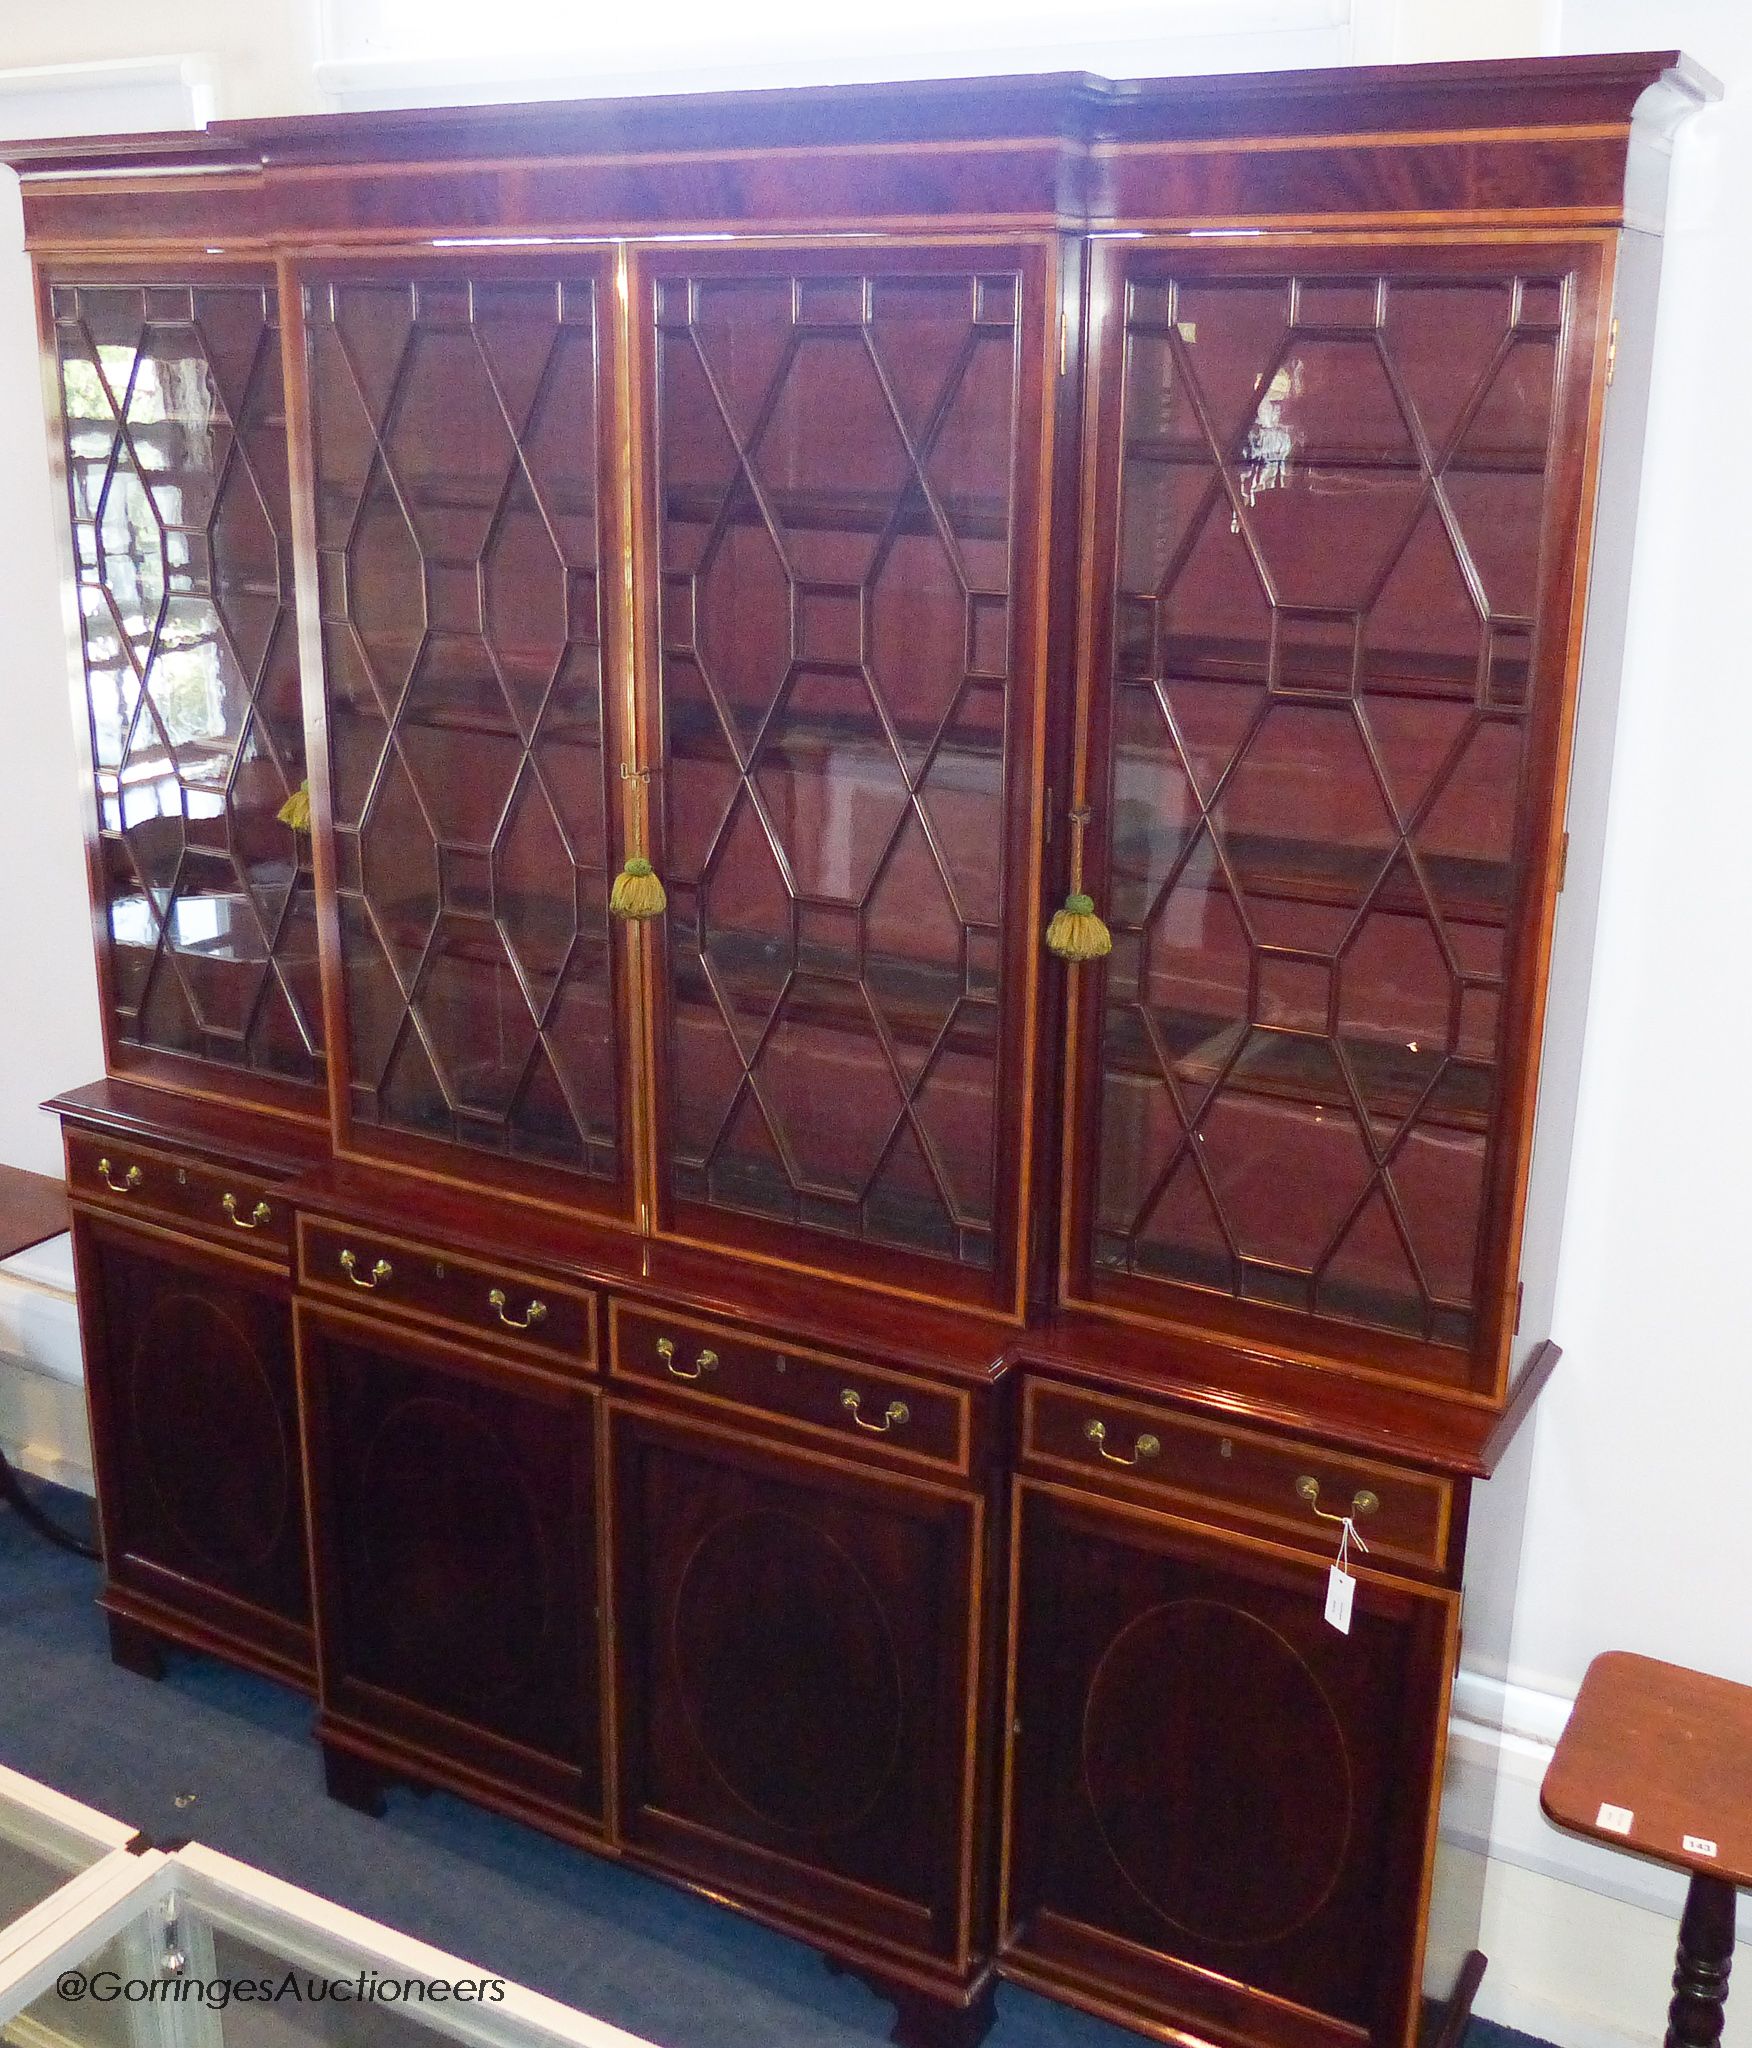 A 19th century and later satinwood banded mahogany breakfront bookcase, 241.5 cm high, approximately 230 cm wide, 42 cm deep